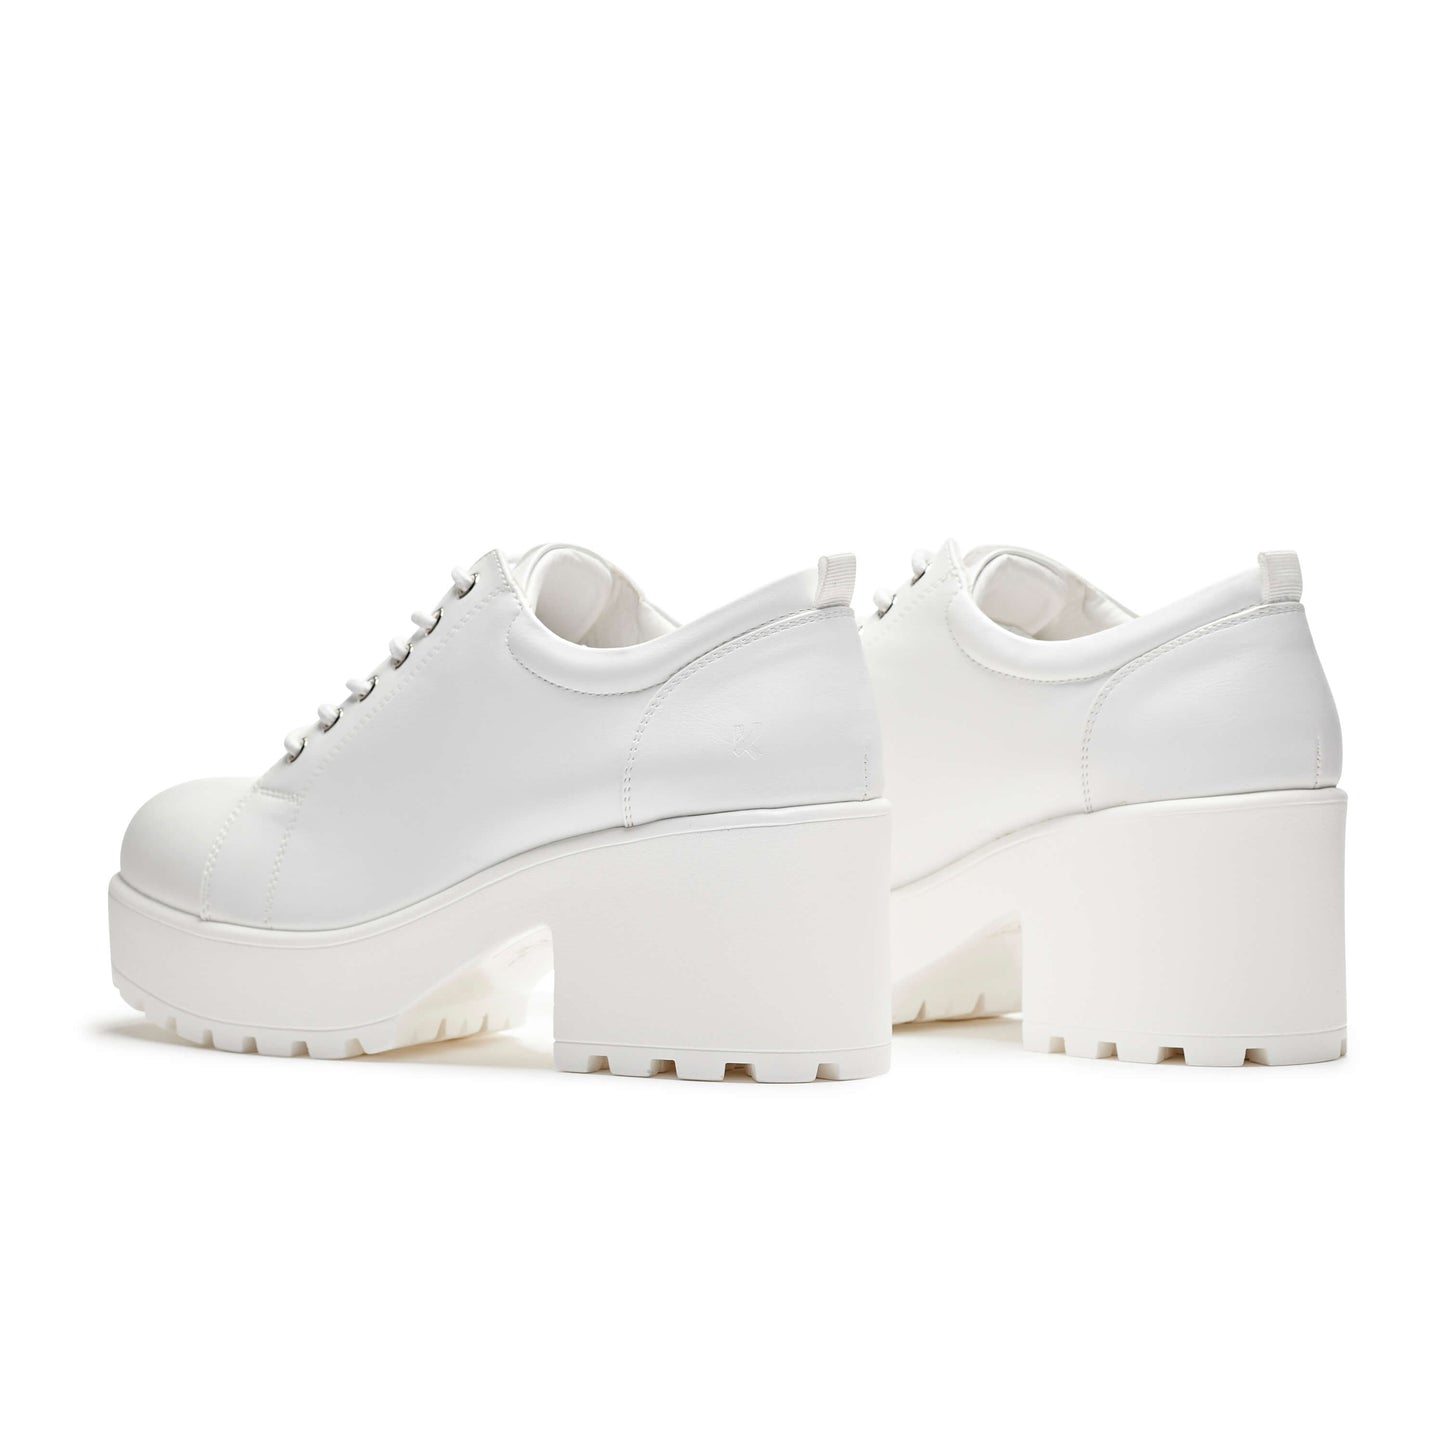 Rei Reloaded White Chunky Shoes - Shoes - KOI Footwear - White - Back View